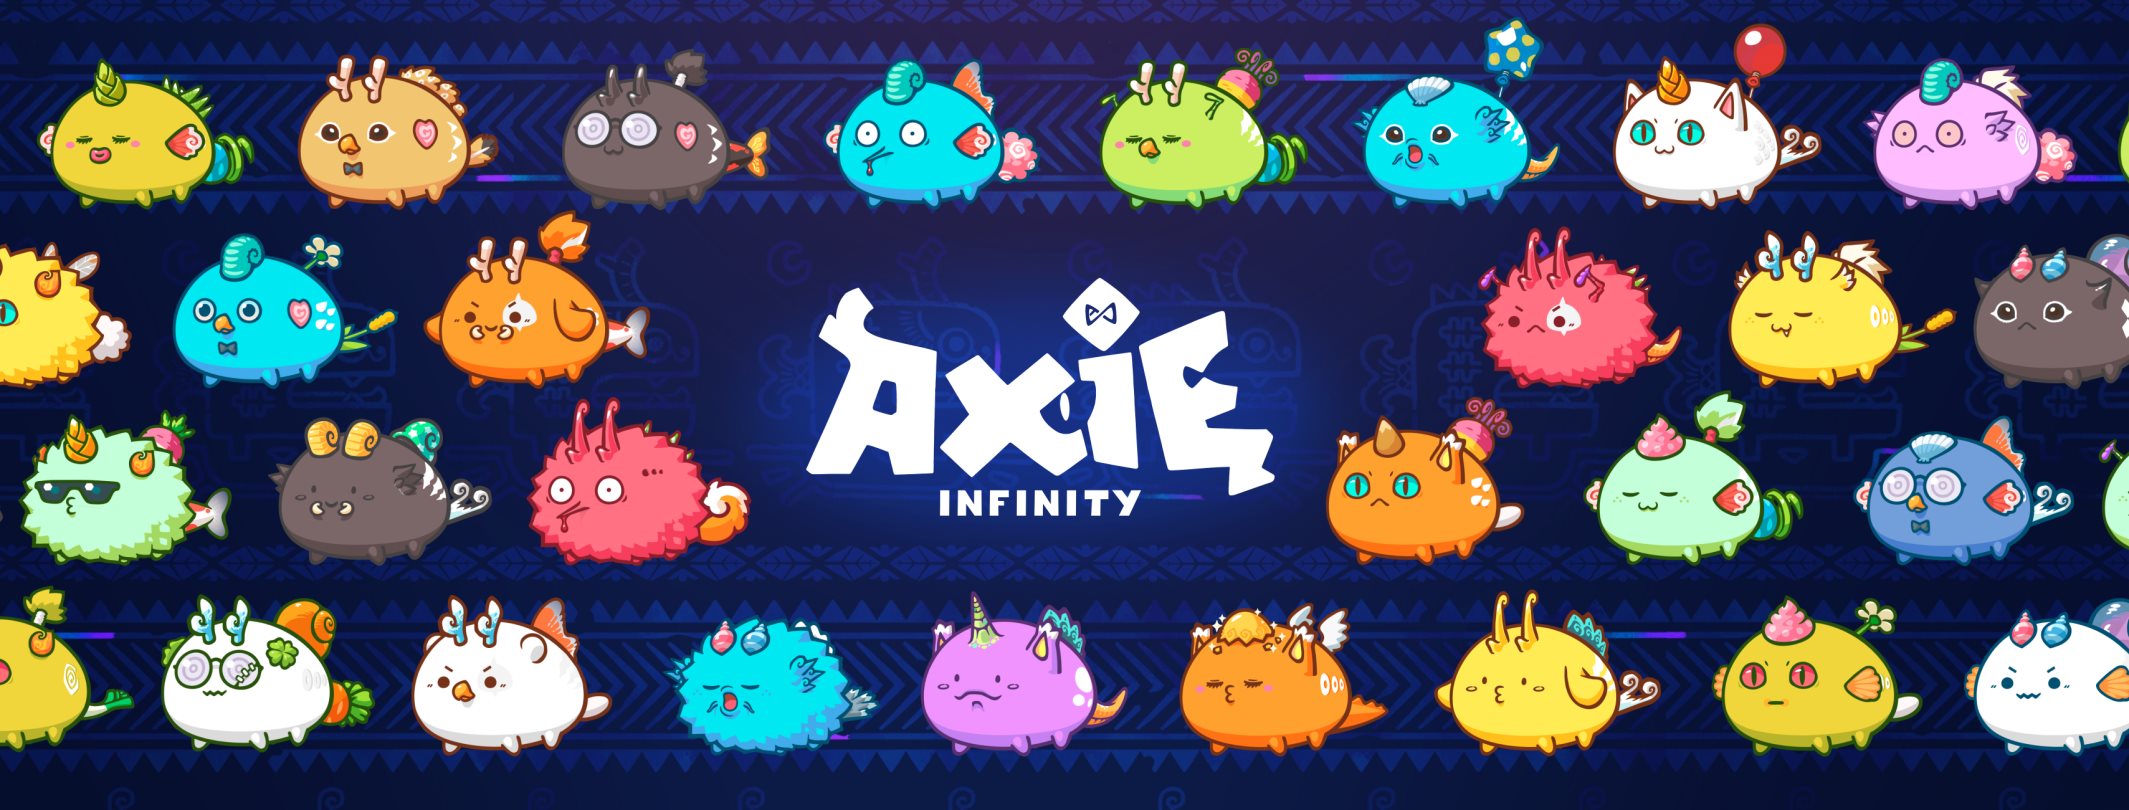 Axie Infinity (AXS) Price Prediction 2021 and Beyond - The Age of Play to Earn Games